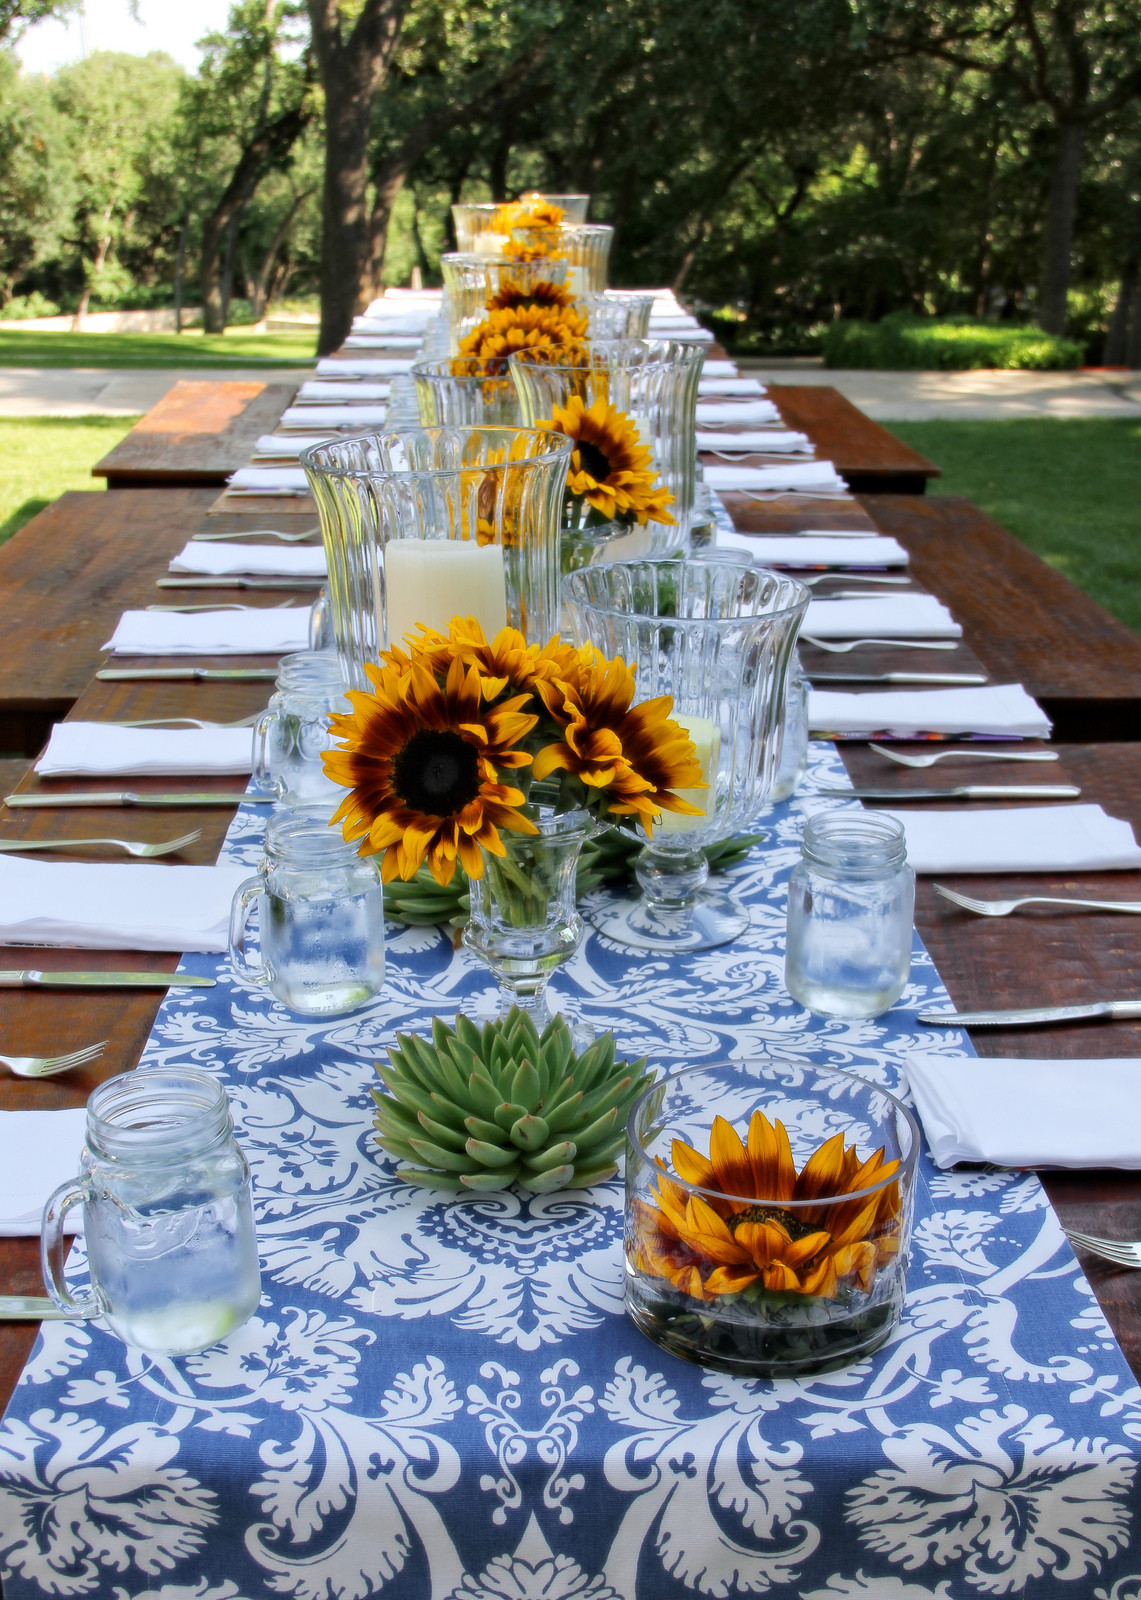 Summer Garden Party Ideas
 50 Outdoor Party Ideas You Should Try Out This Summer